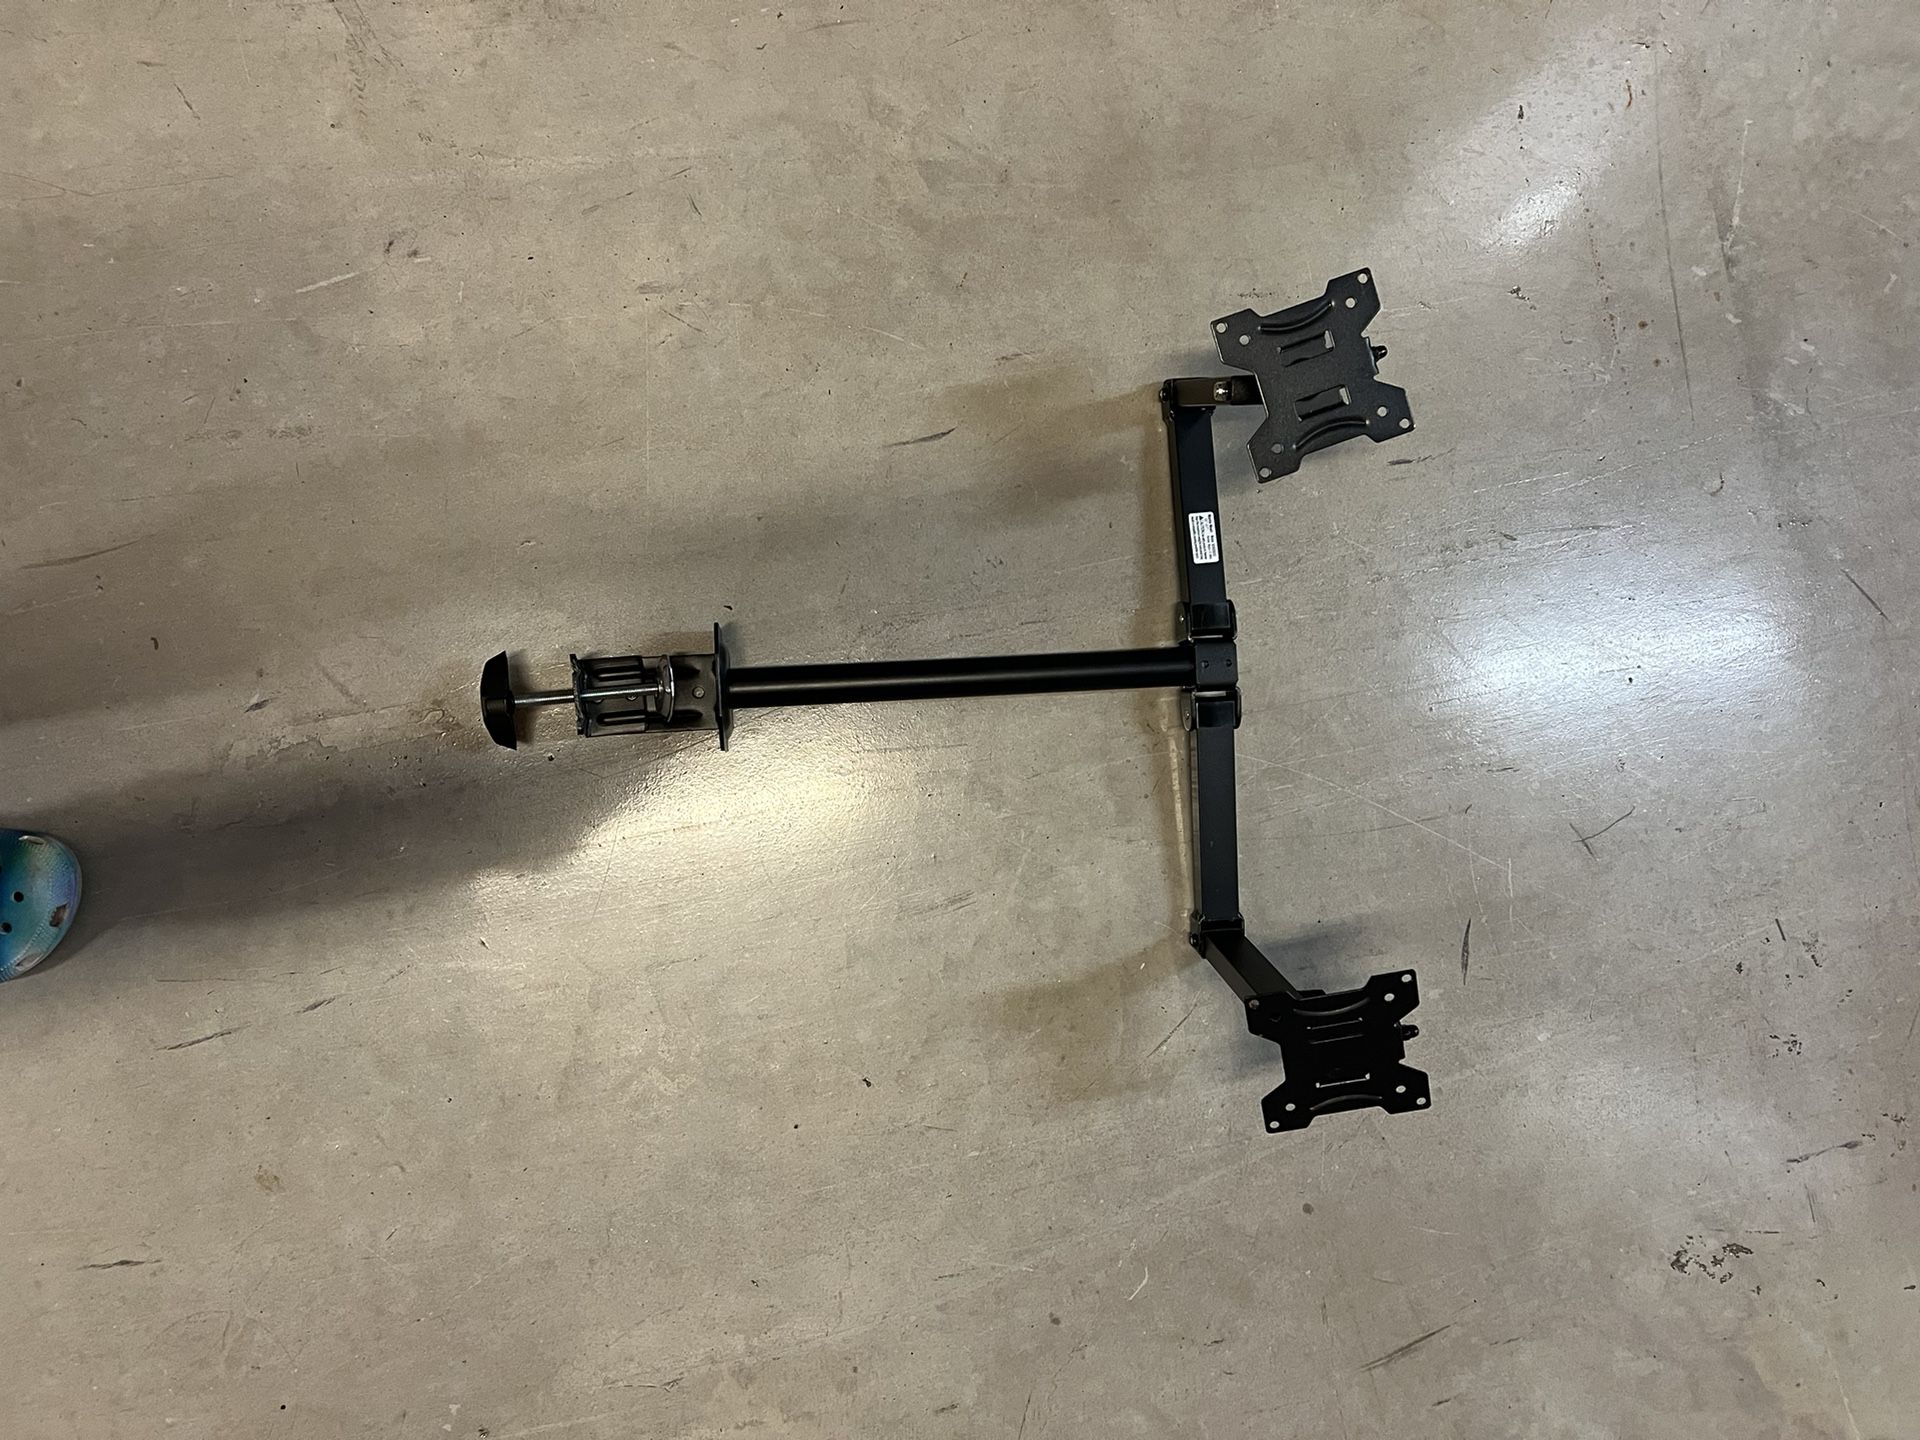  Dual Monitor Desk Mount for 13" to 27" Monitors